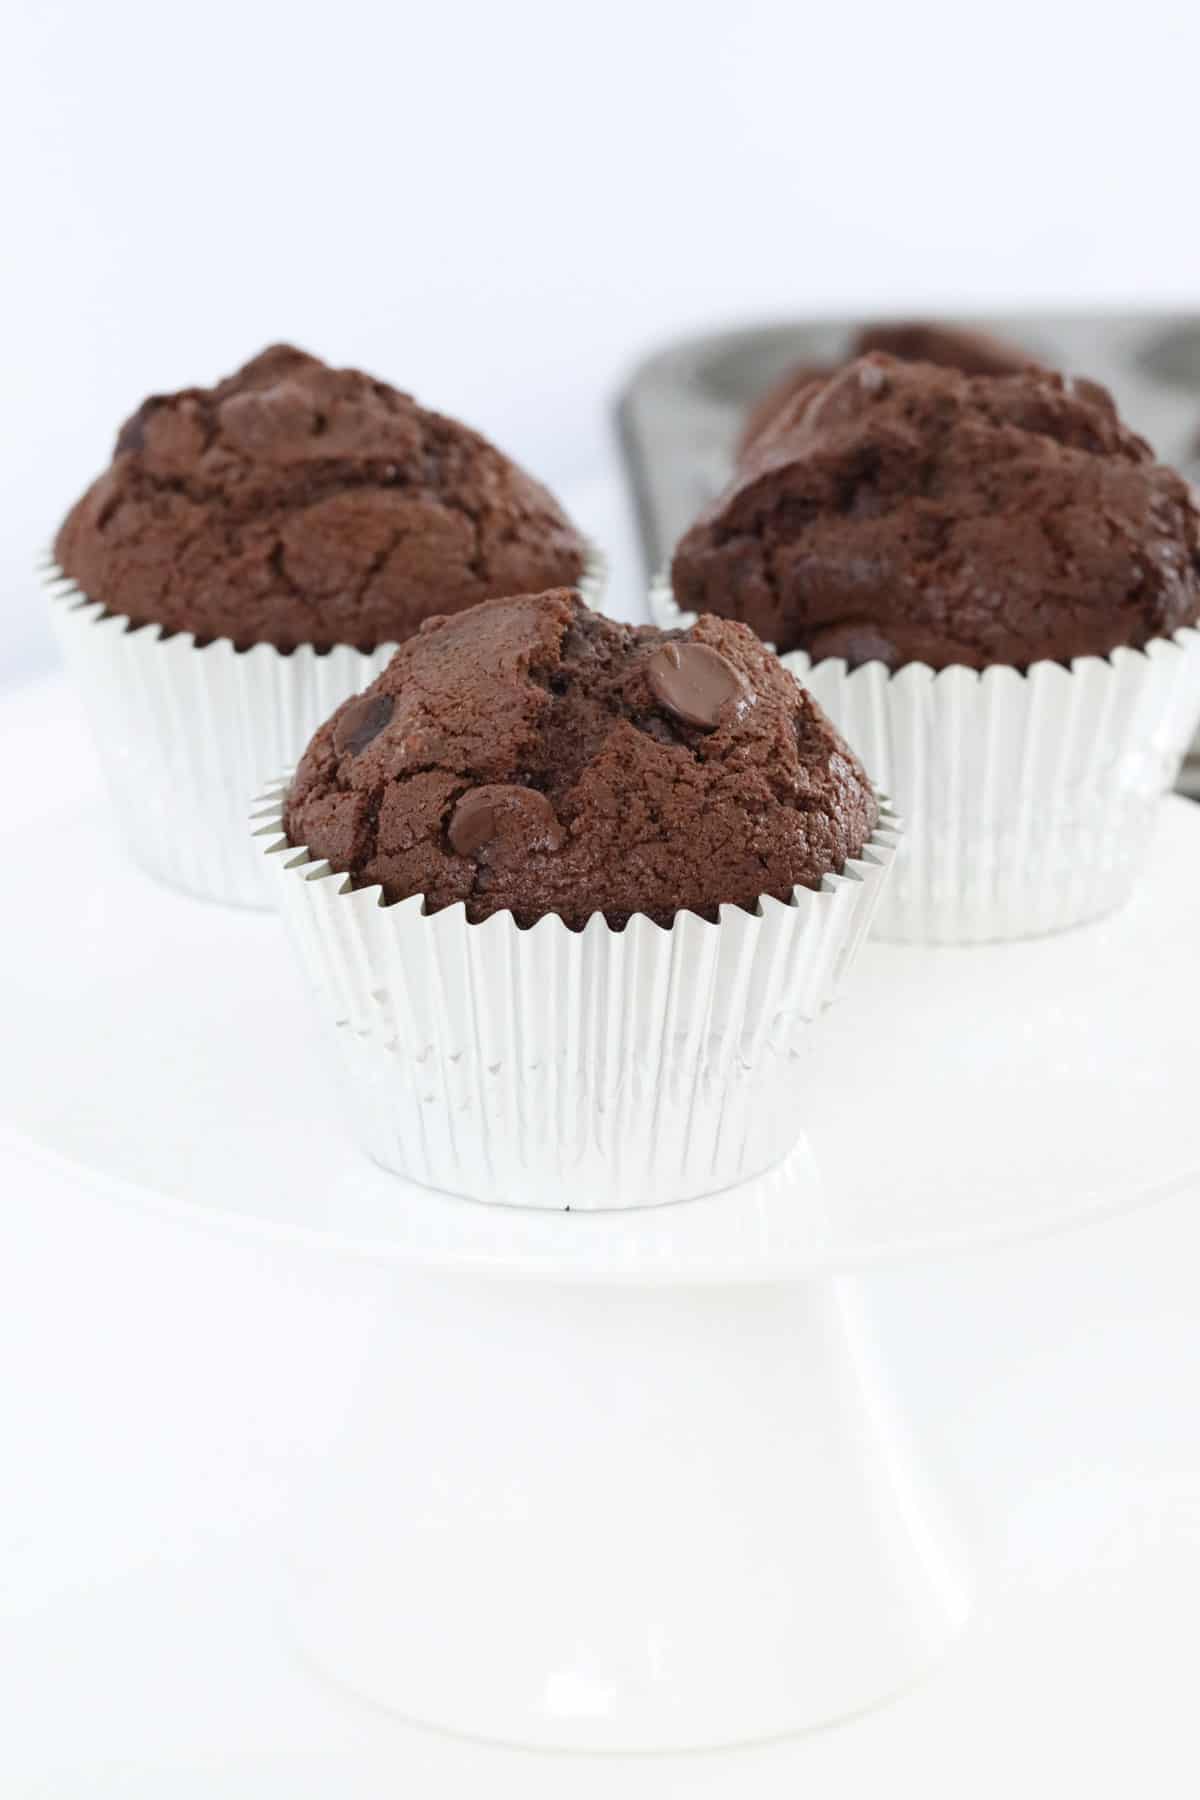 Chocolate muffins in silver muffin cases on a white cake stand